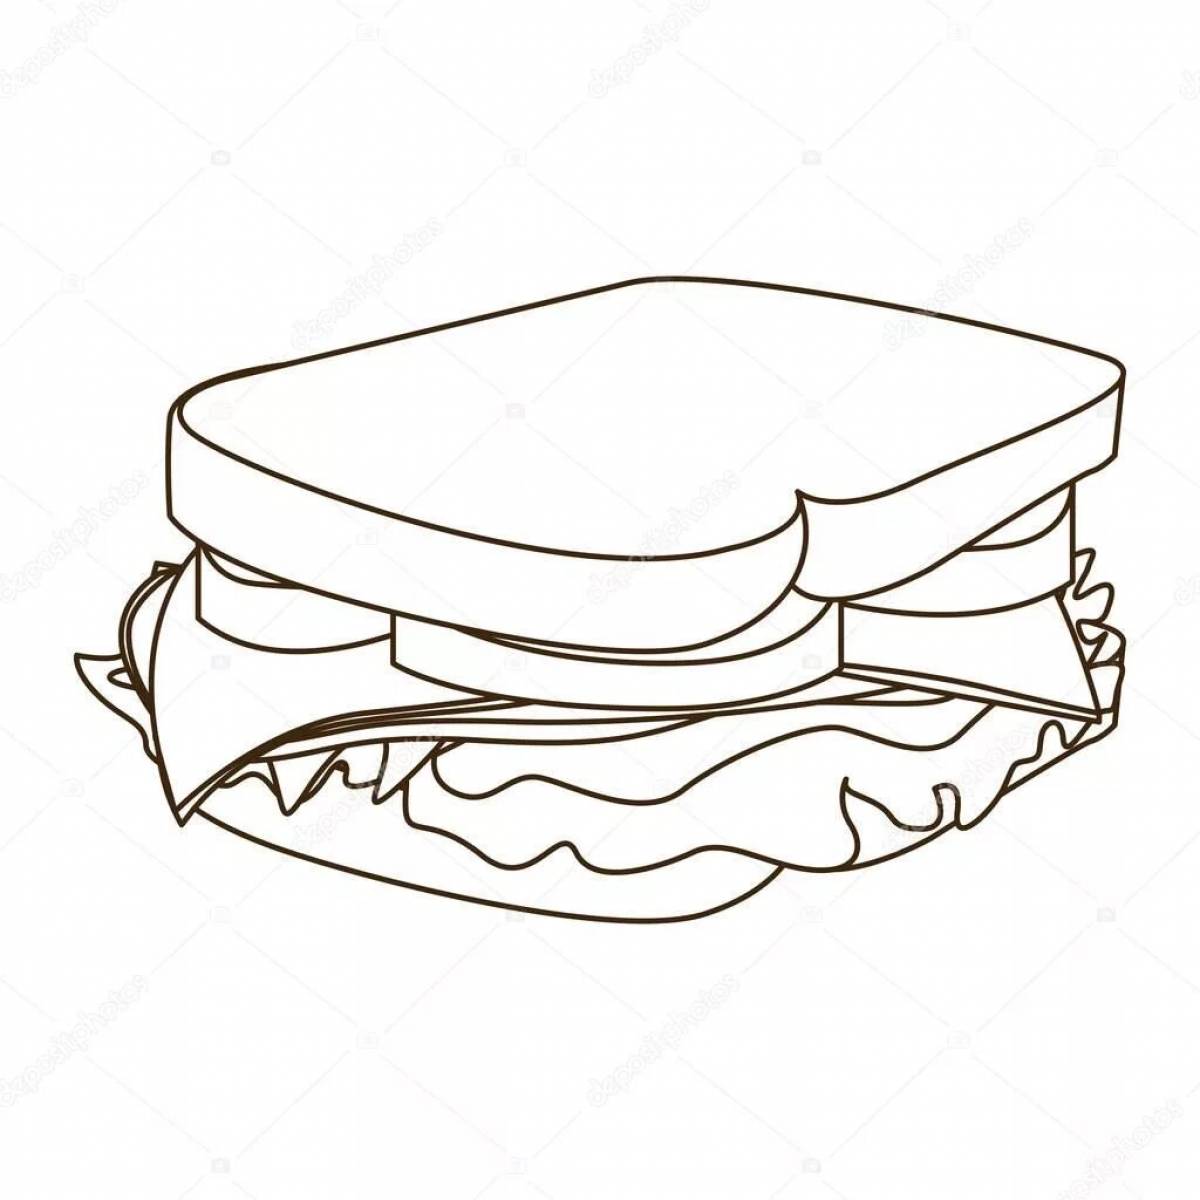 An unexpected sandwich coloring book for kids